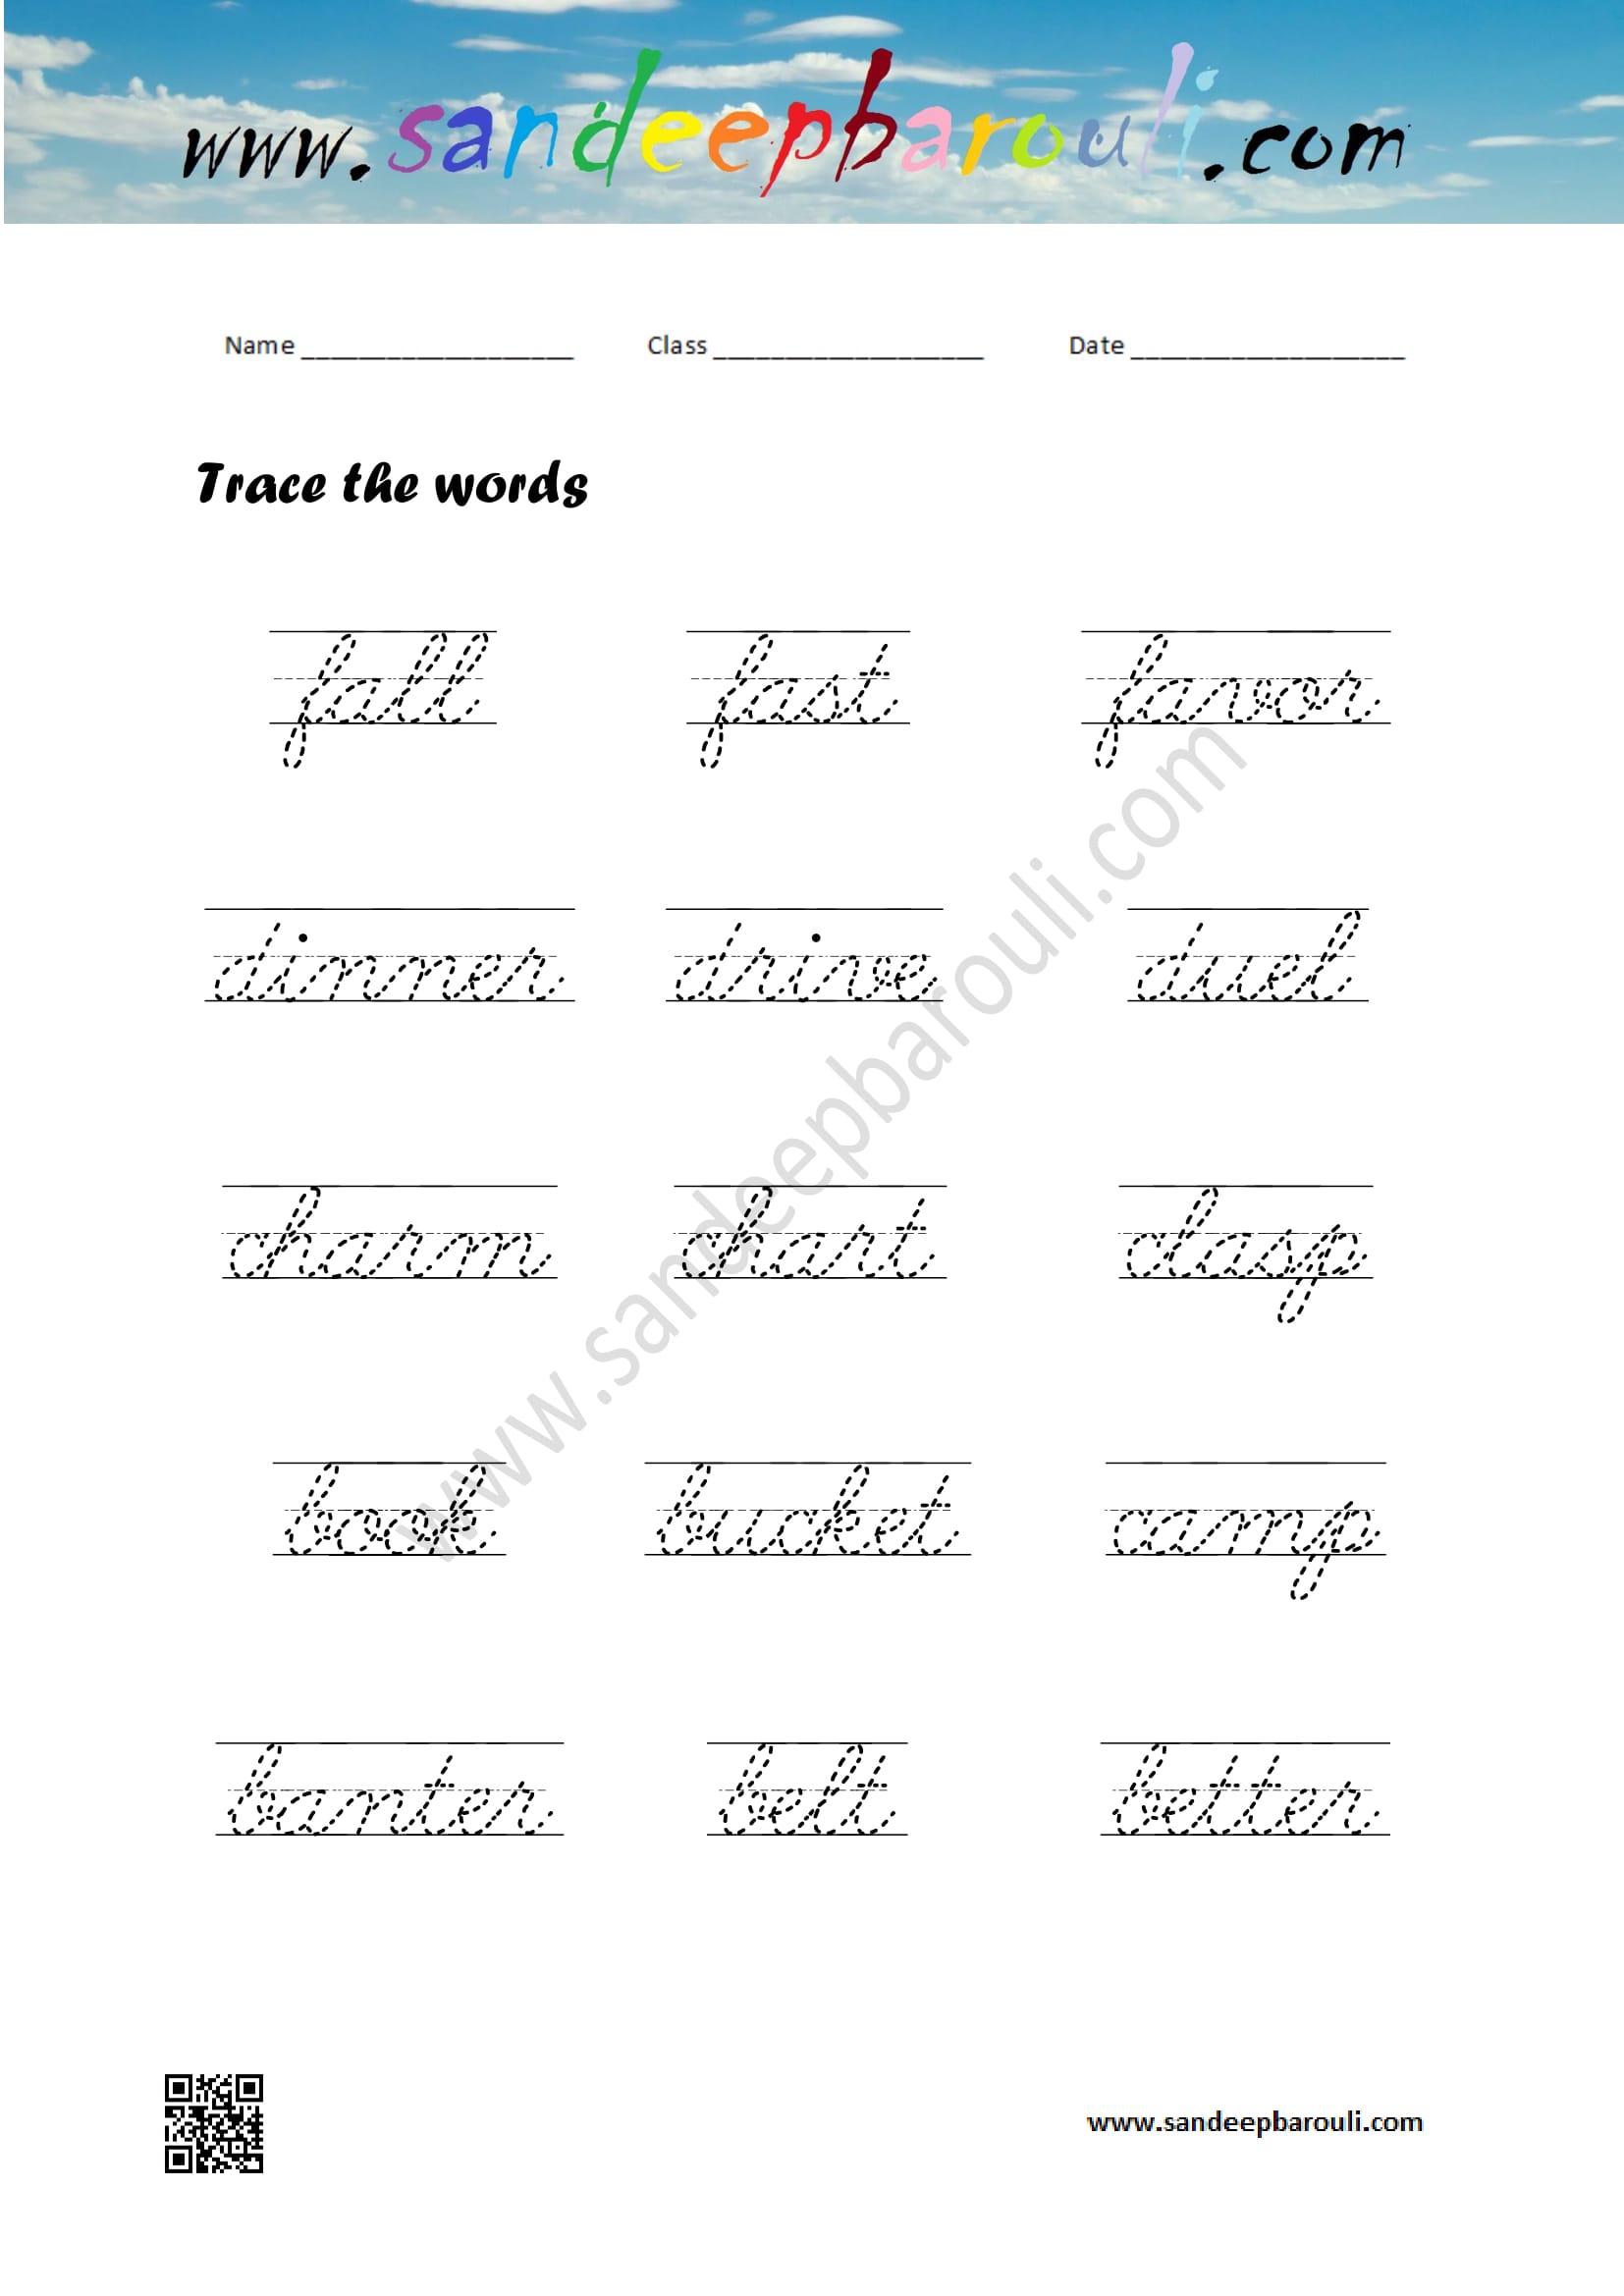 Cursive Writing Worksheet – Trace the words (37)